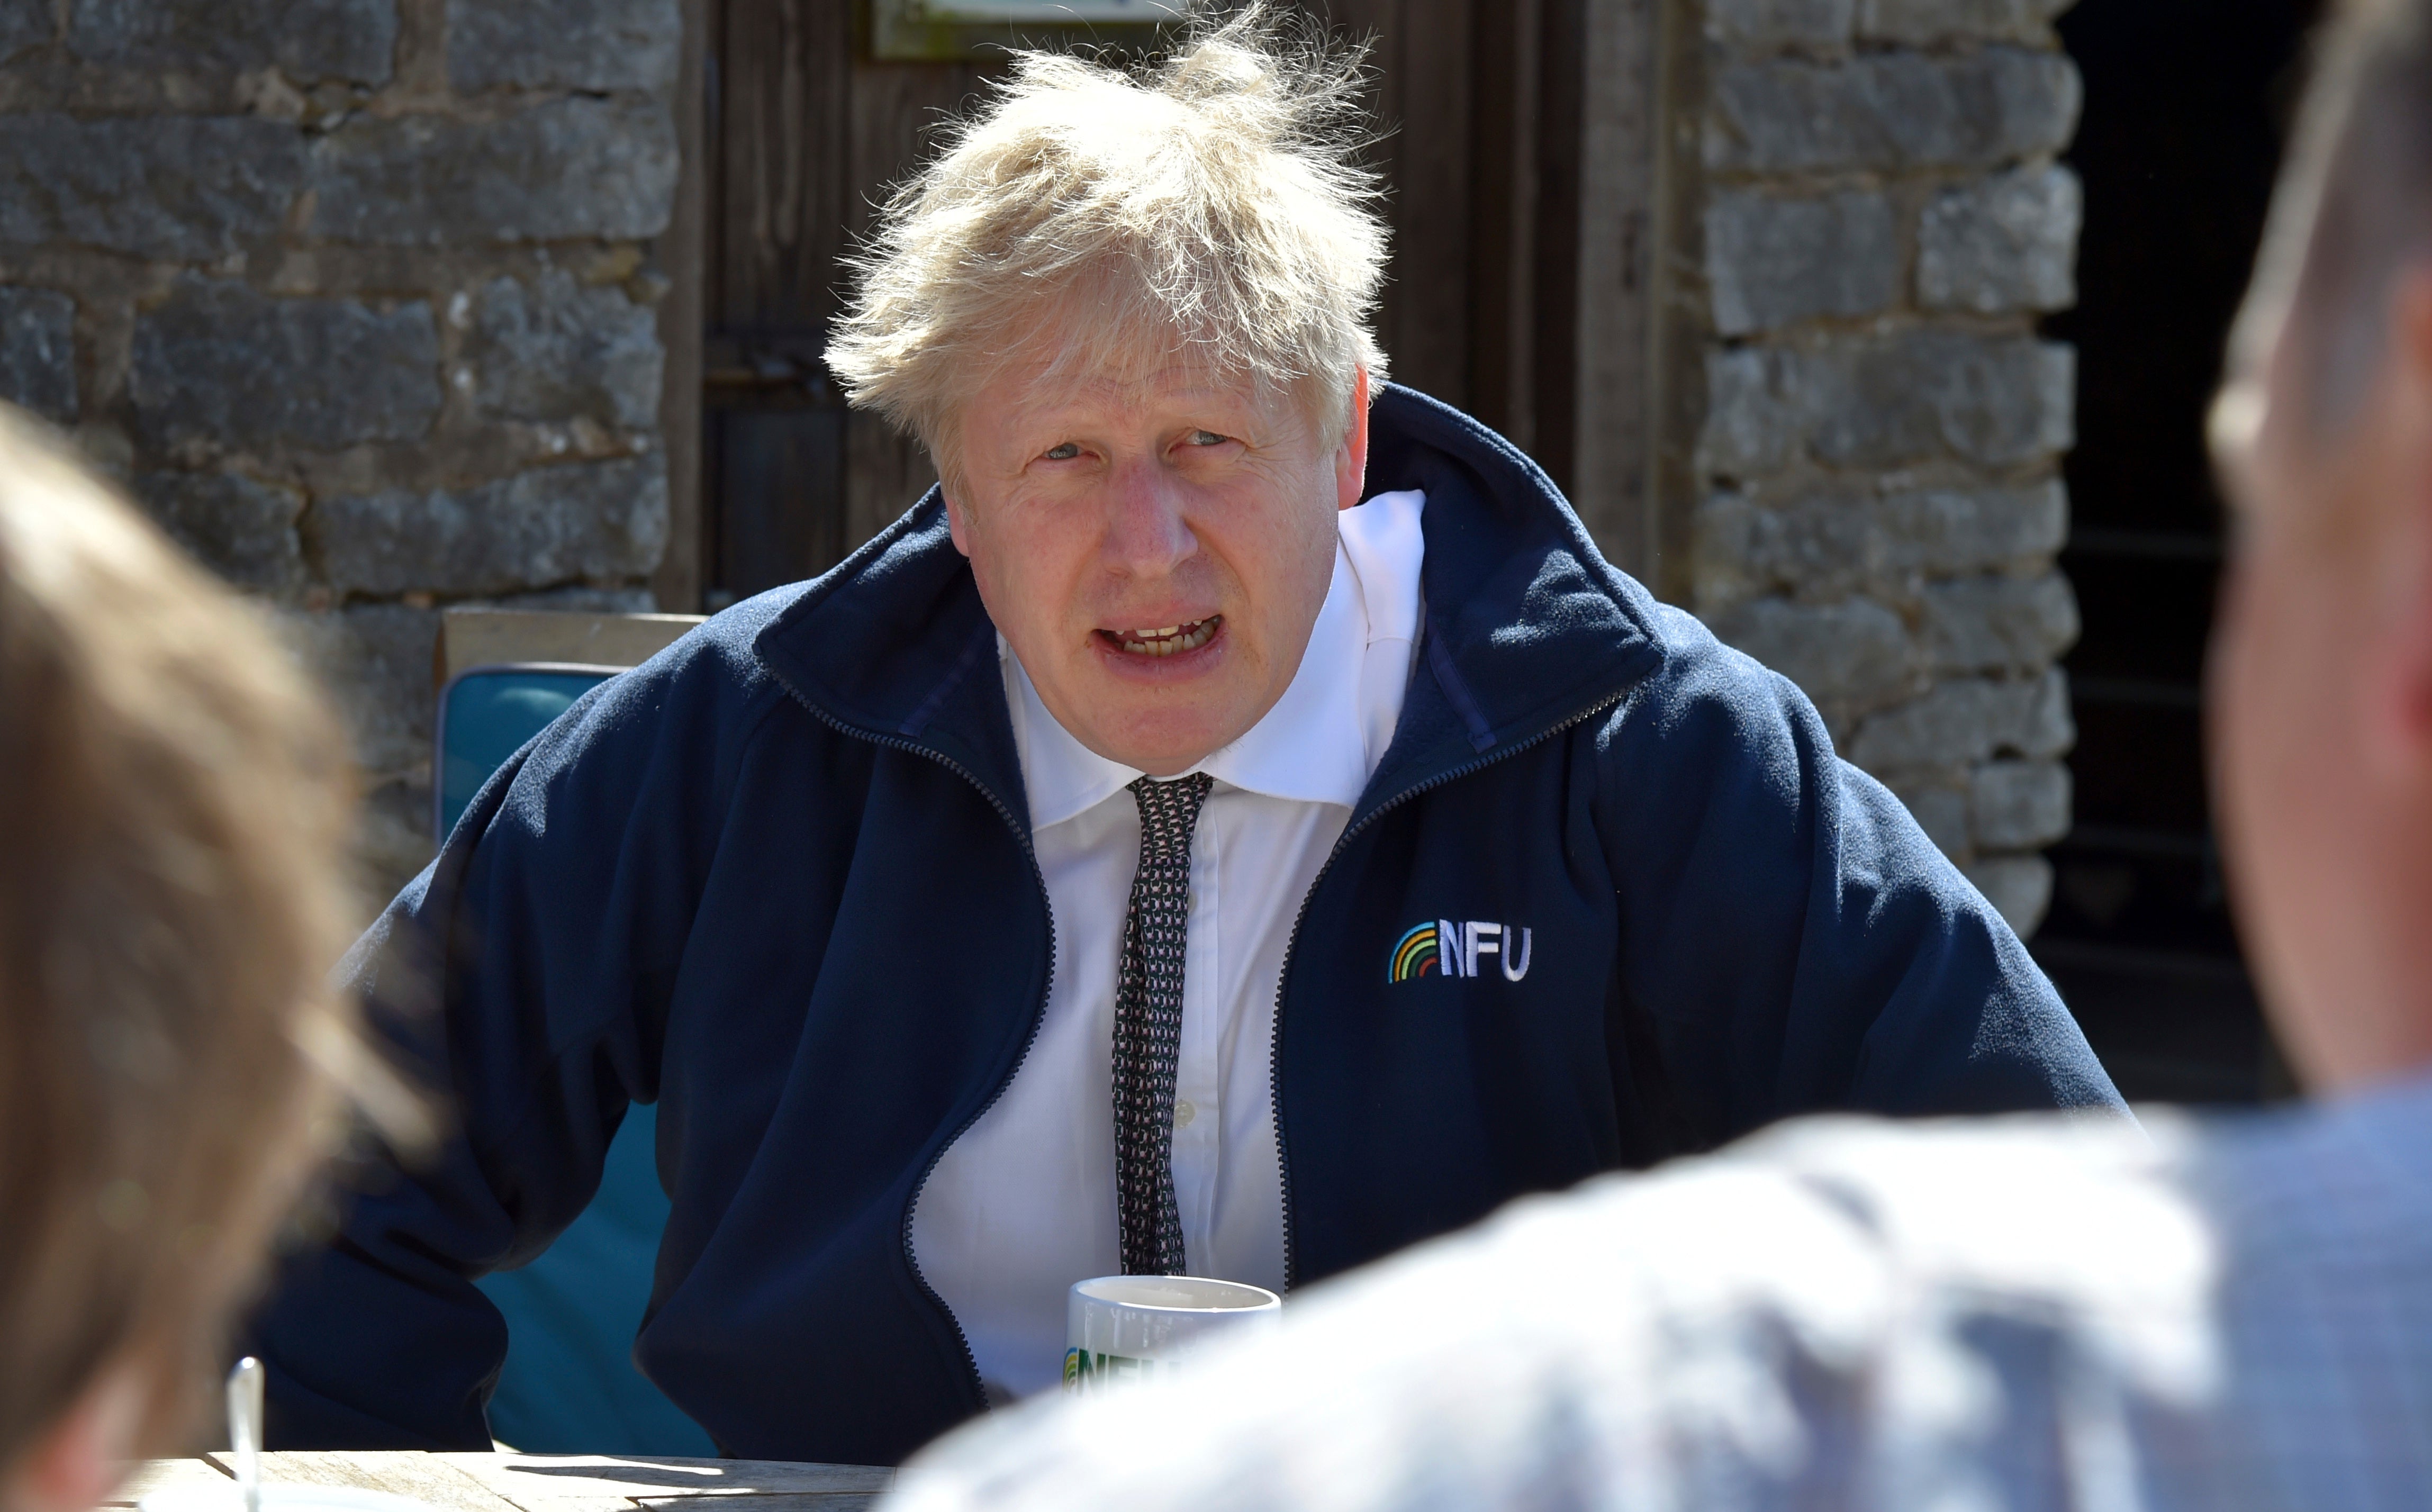 Boris Johnson campaigns in Derbyshire ahead of local elections next week